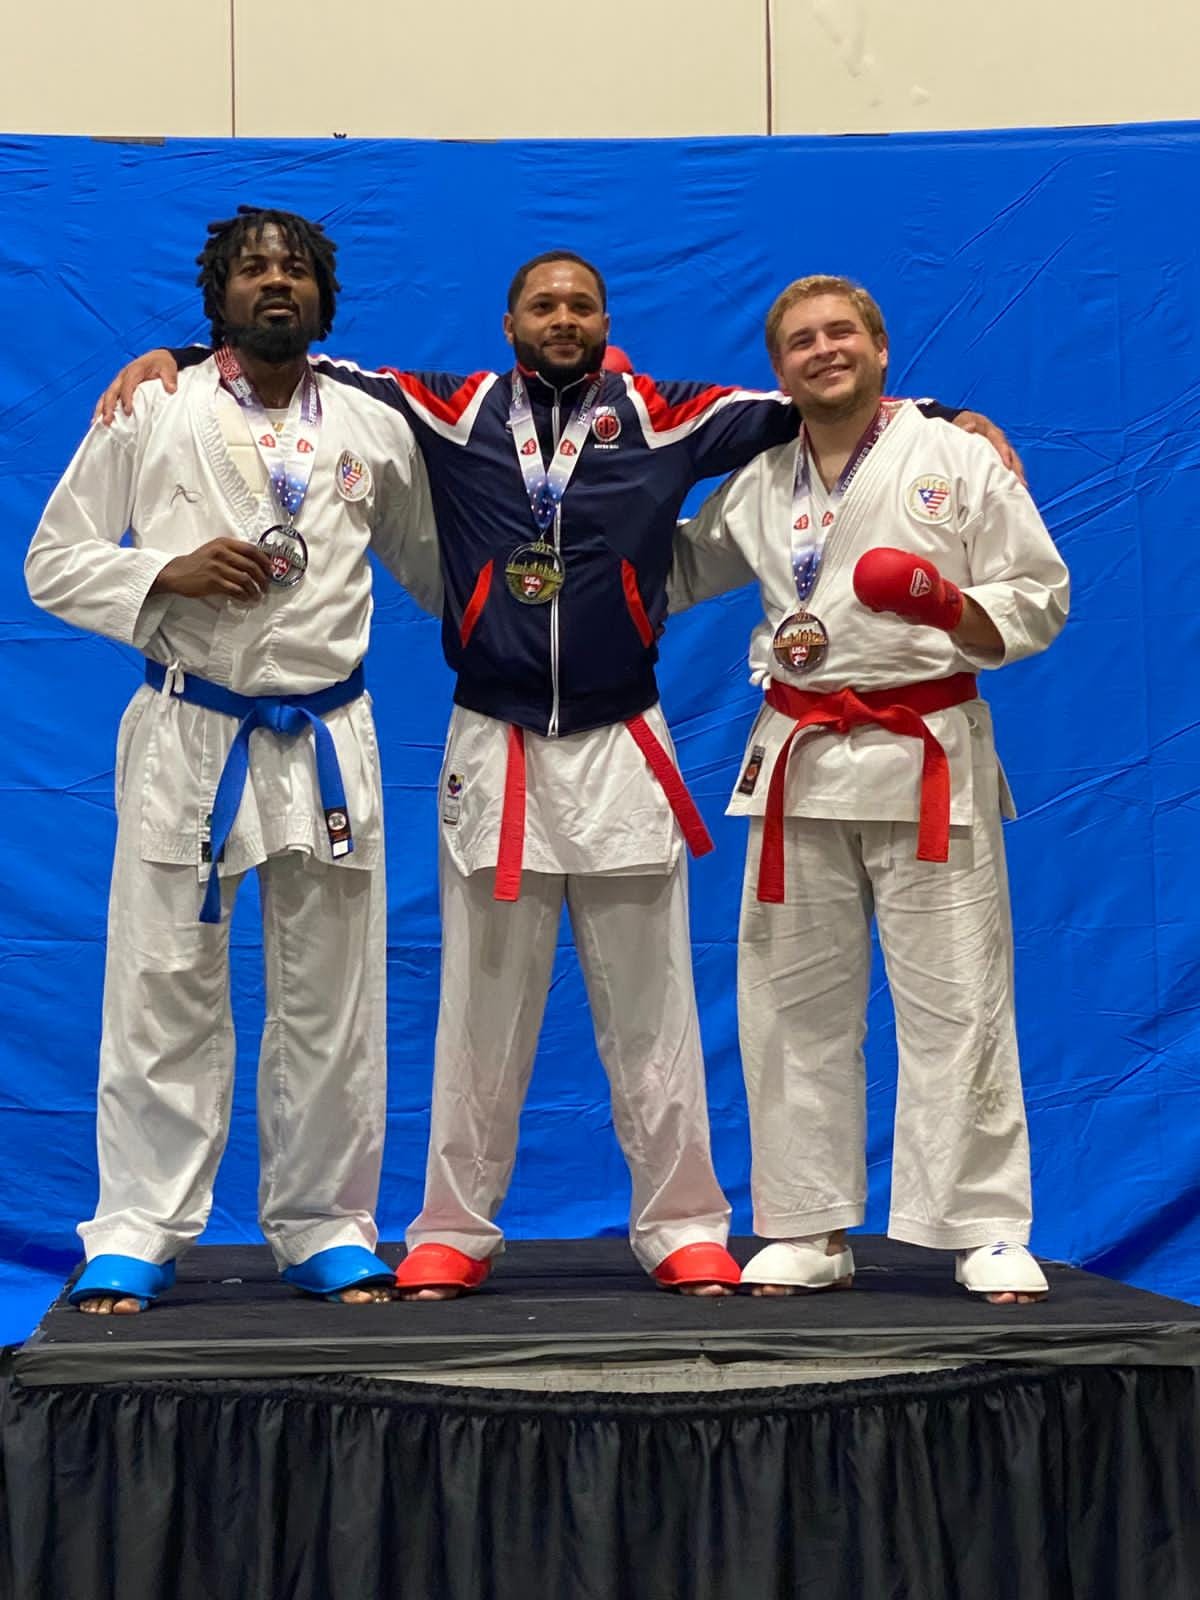 Chen Emechete takes 2nd place at the USA Karate 2021 Nationals in Chicago, Illinois